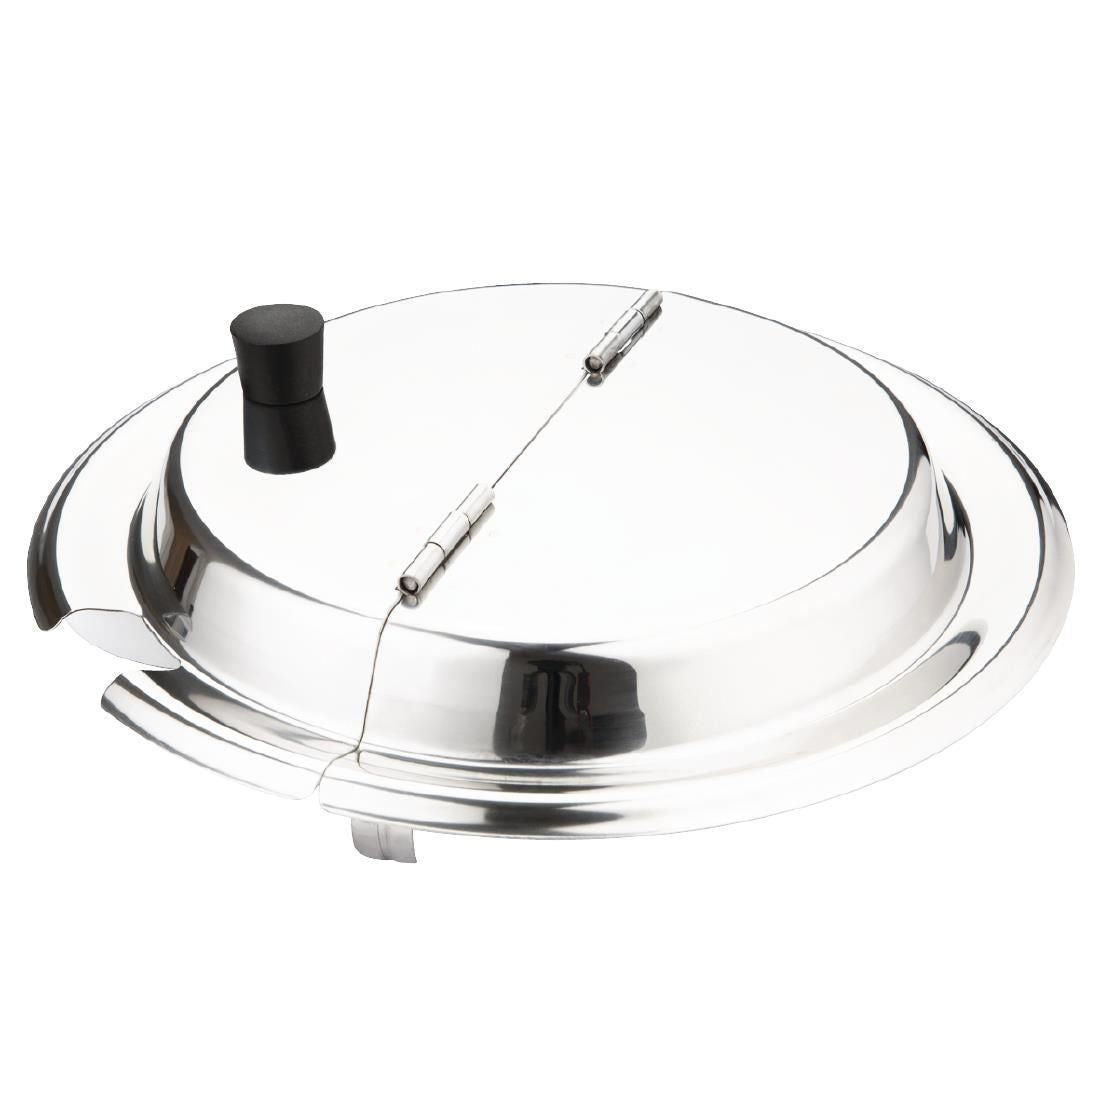 Buffalo Soup Kettle Lid with Knob JD Catering Equipment Solutions Ltd